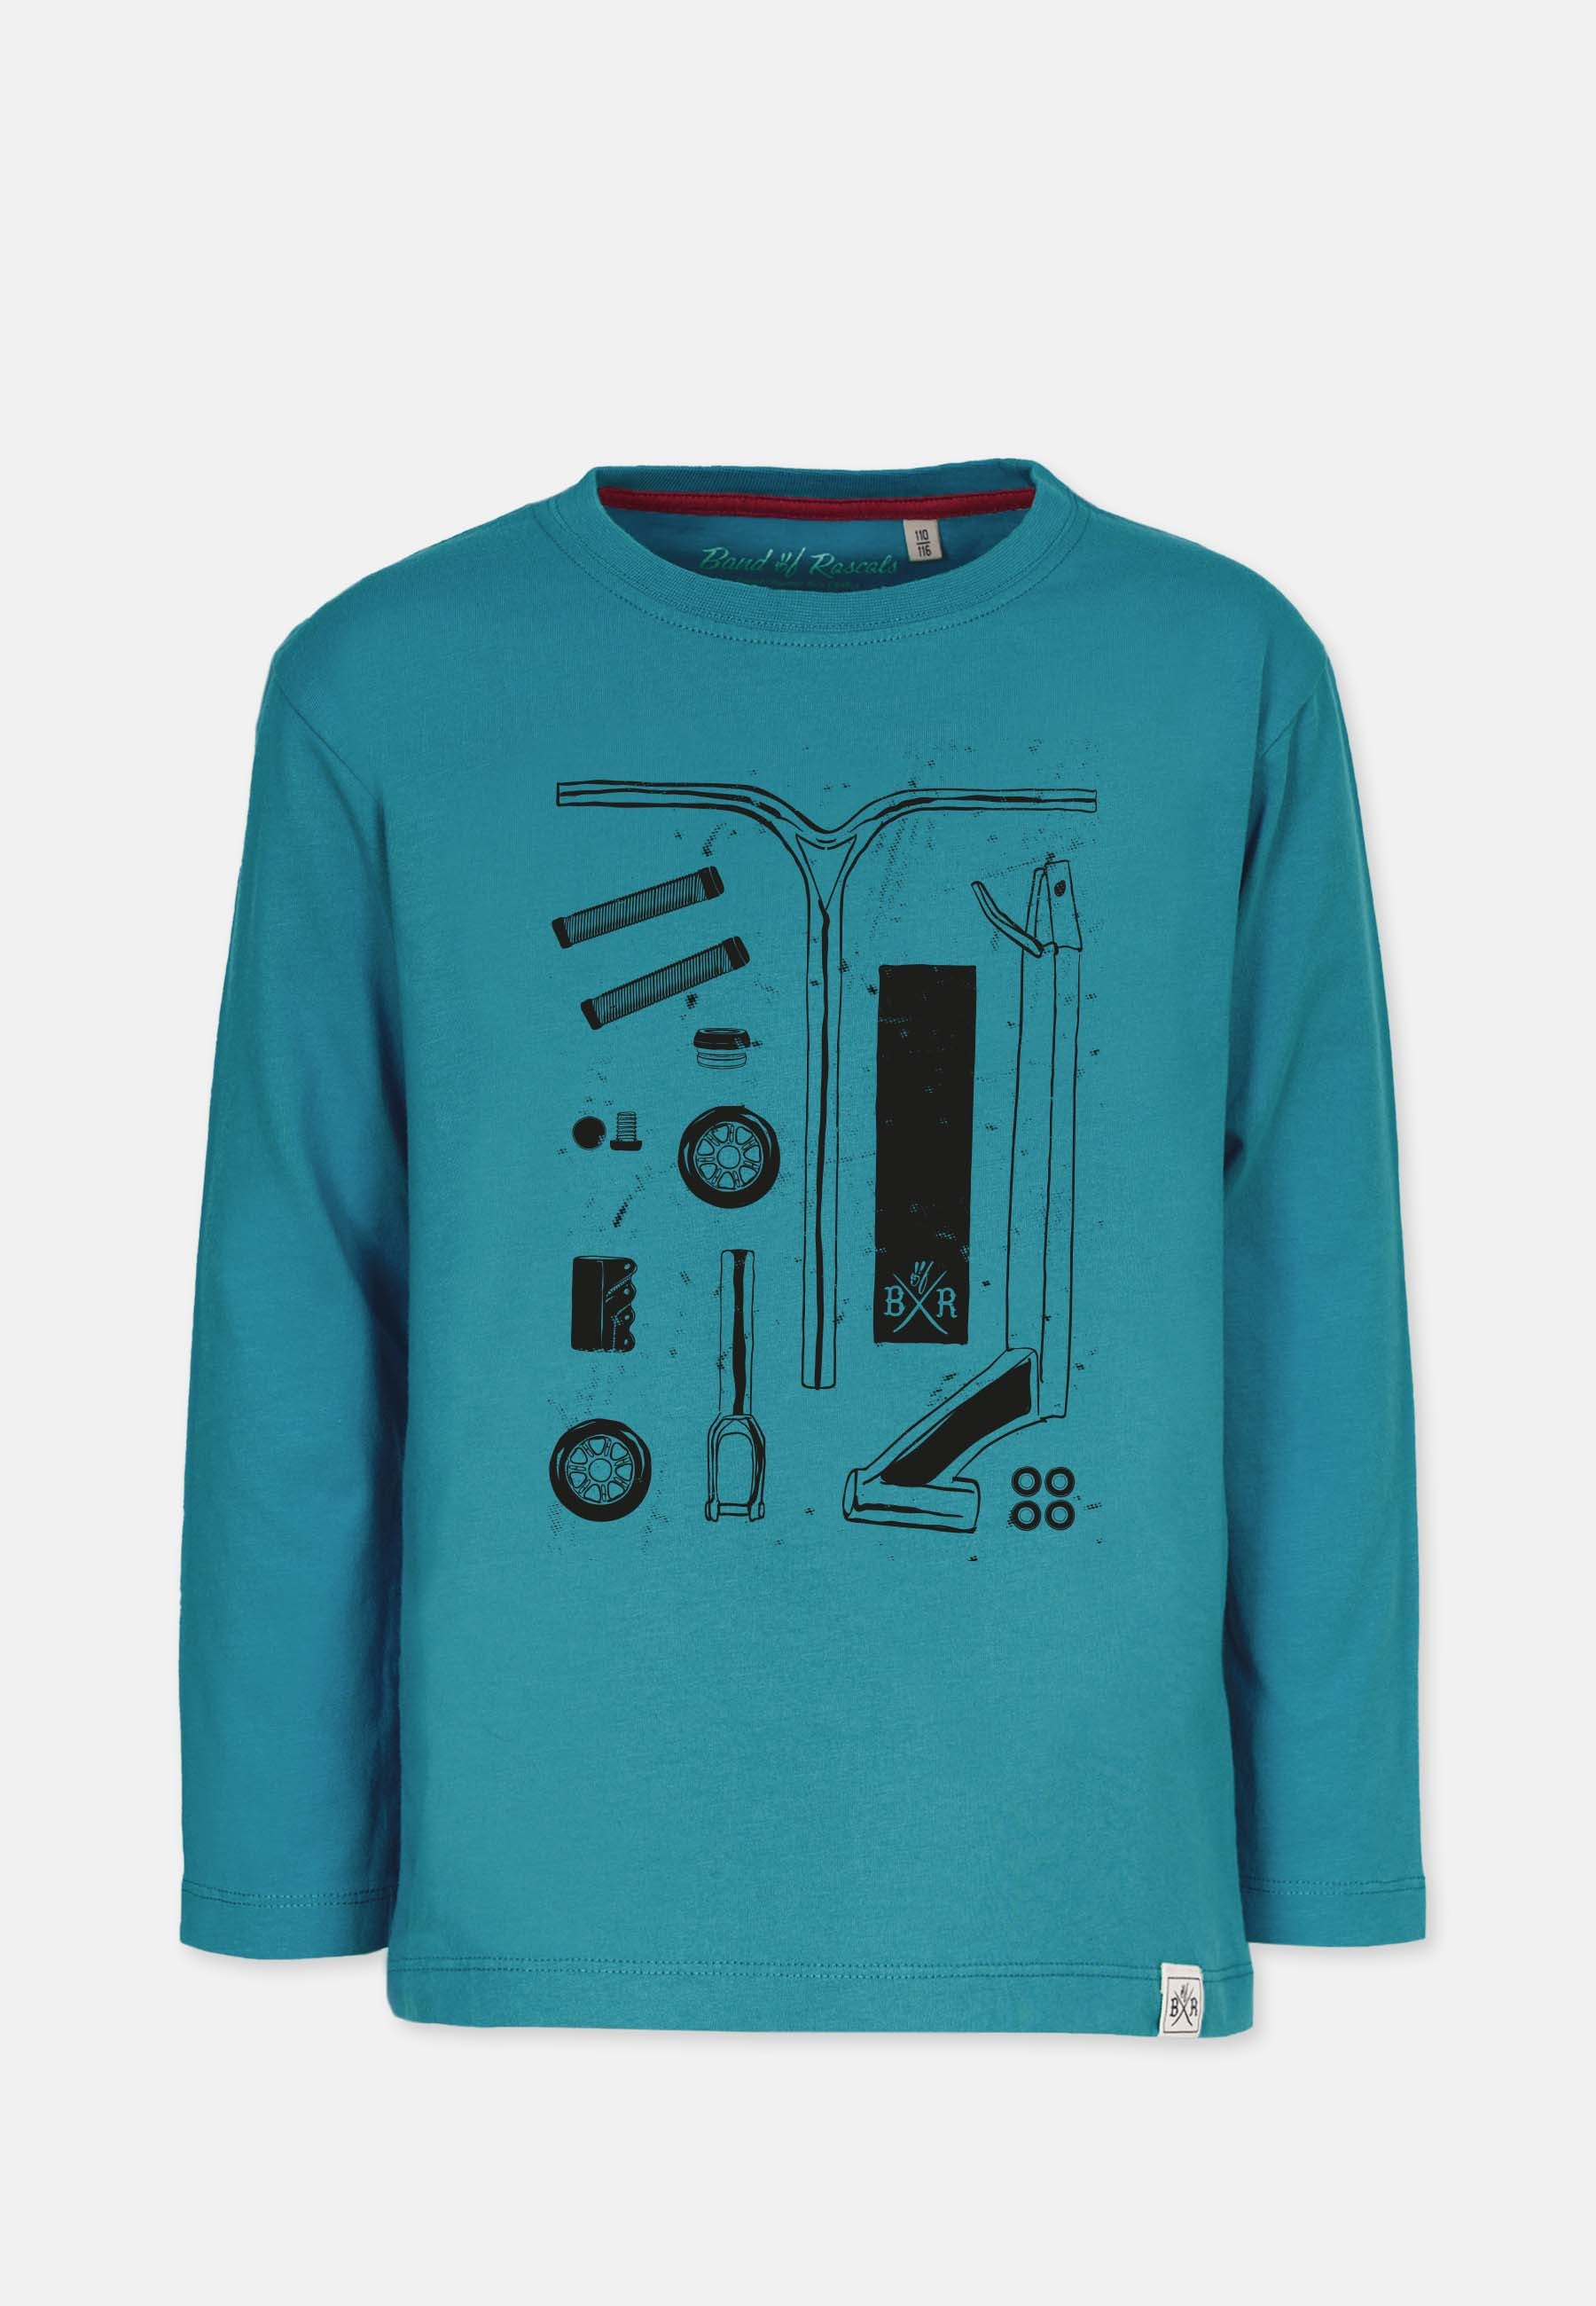 Scooter Parts Longsleeve